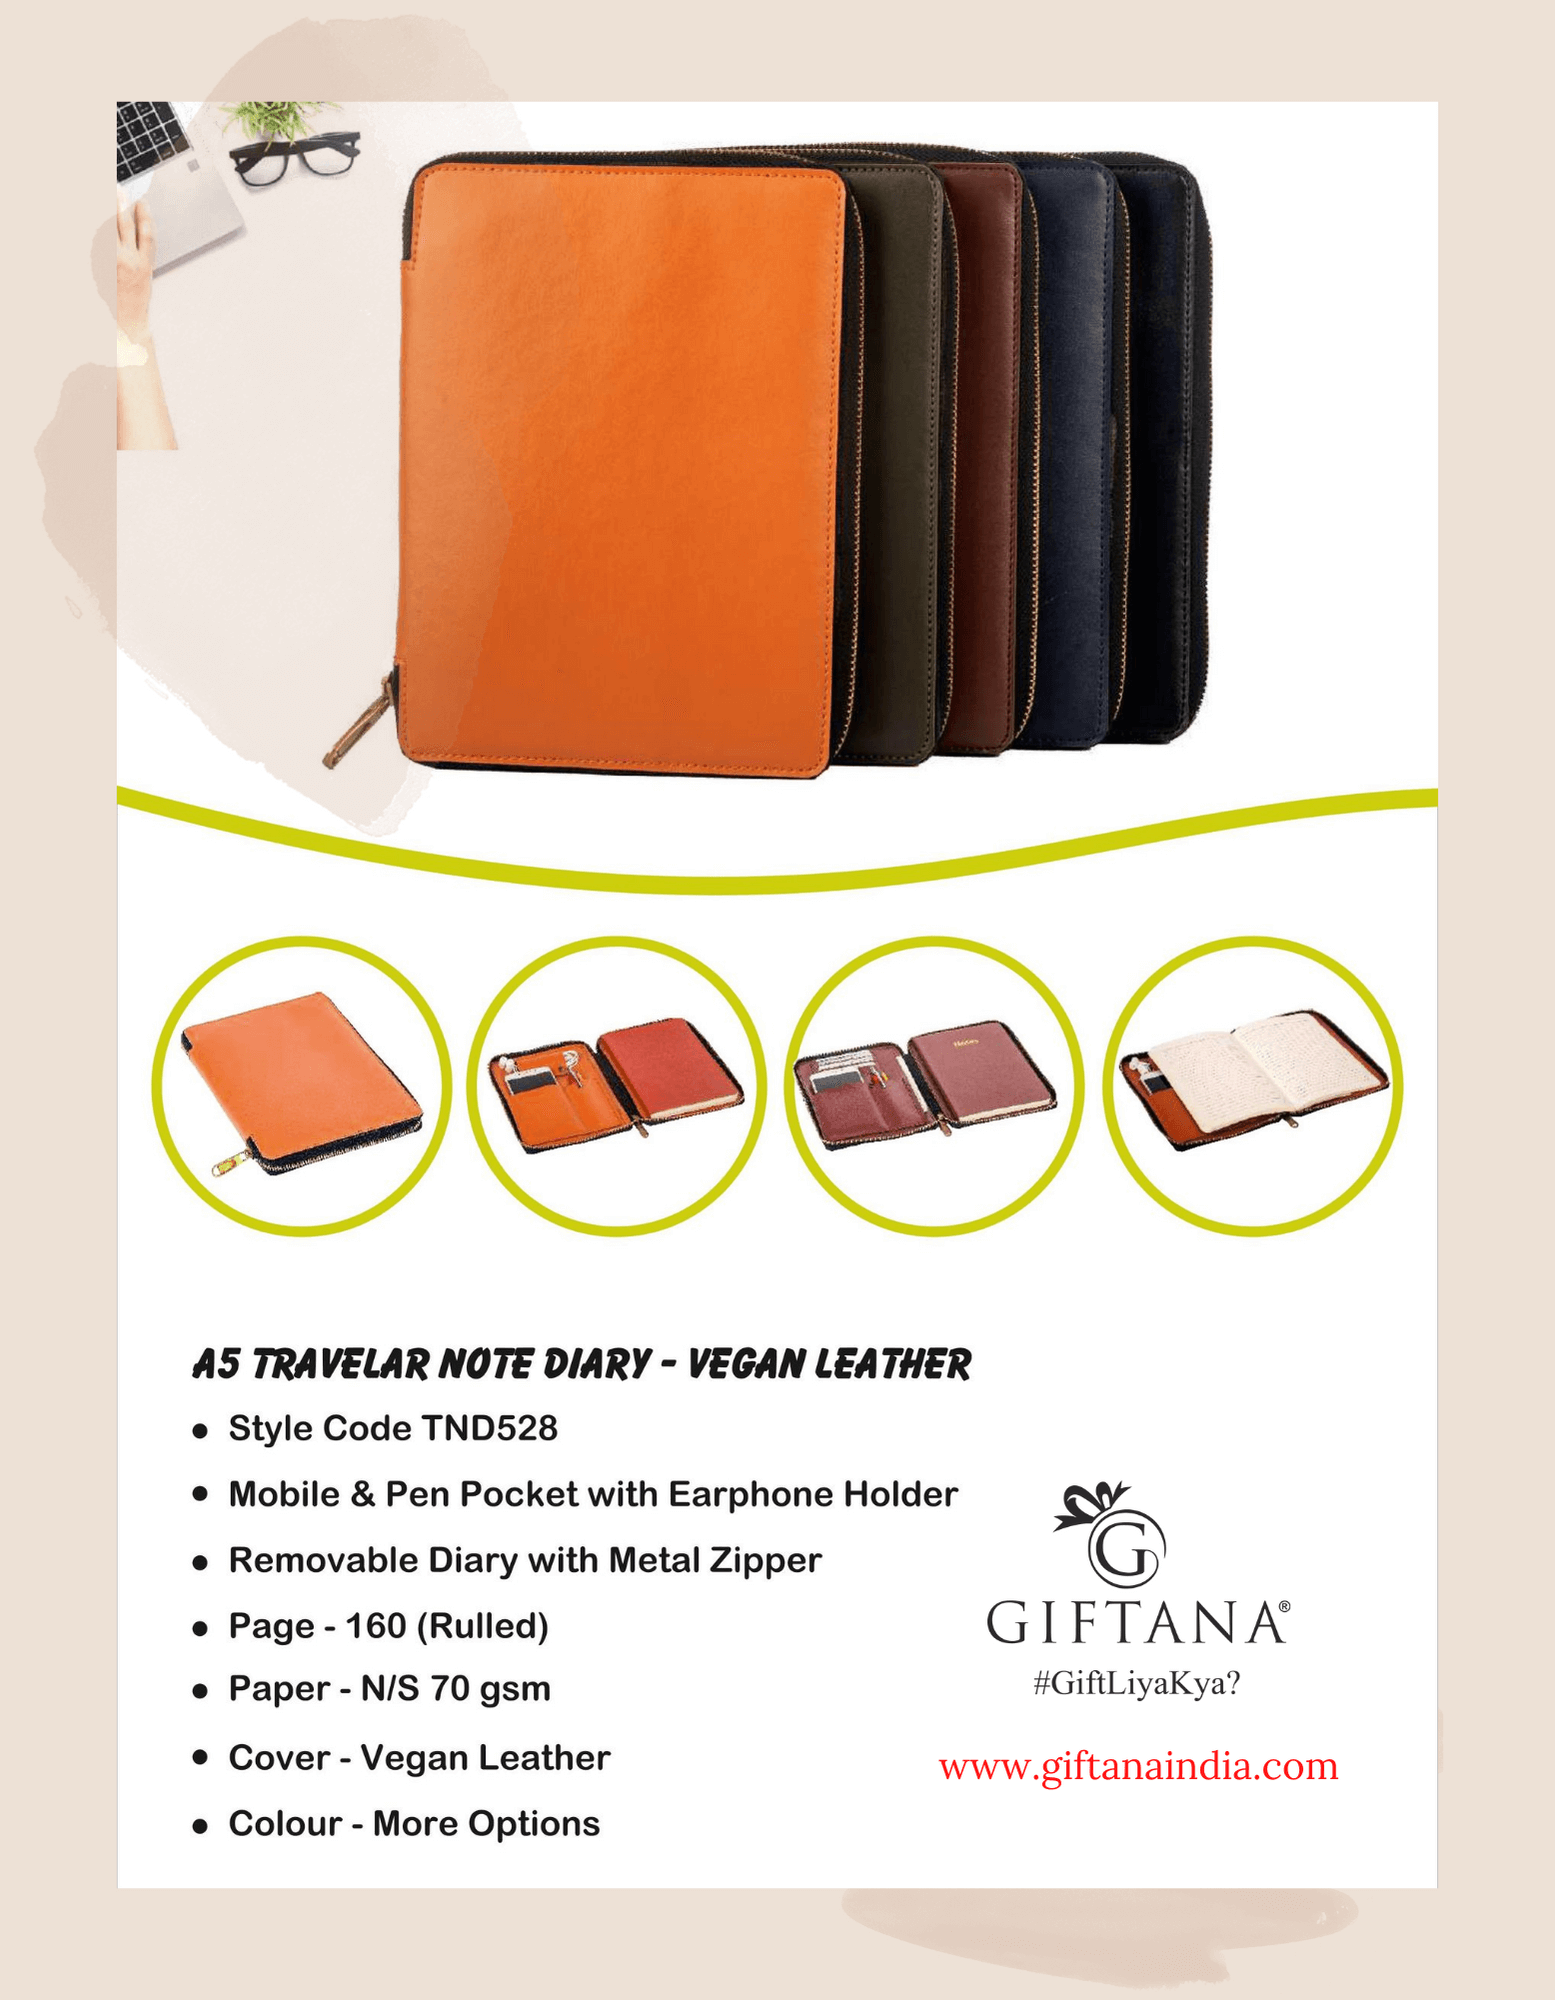 A5 Travel Notebook Diary Vegan Leather